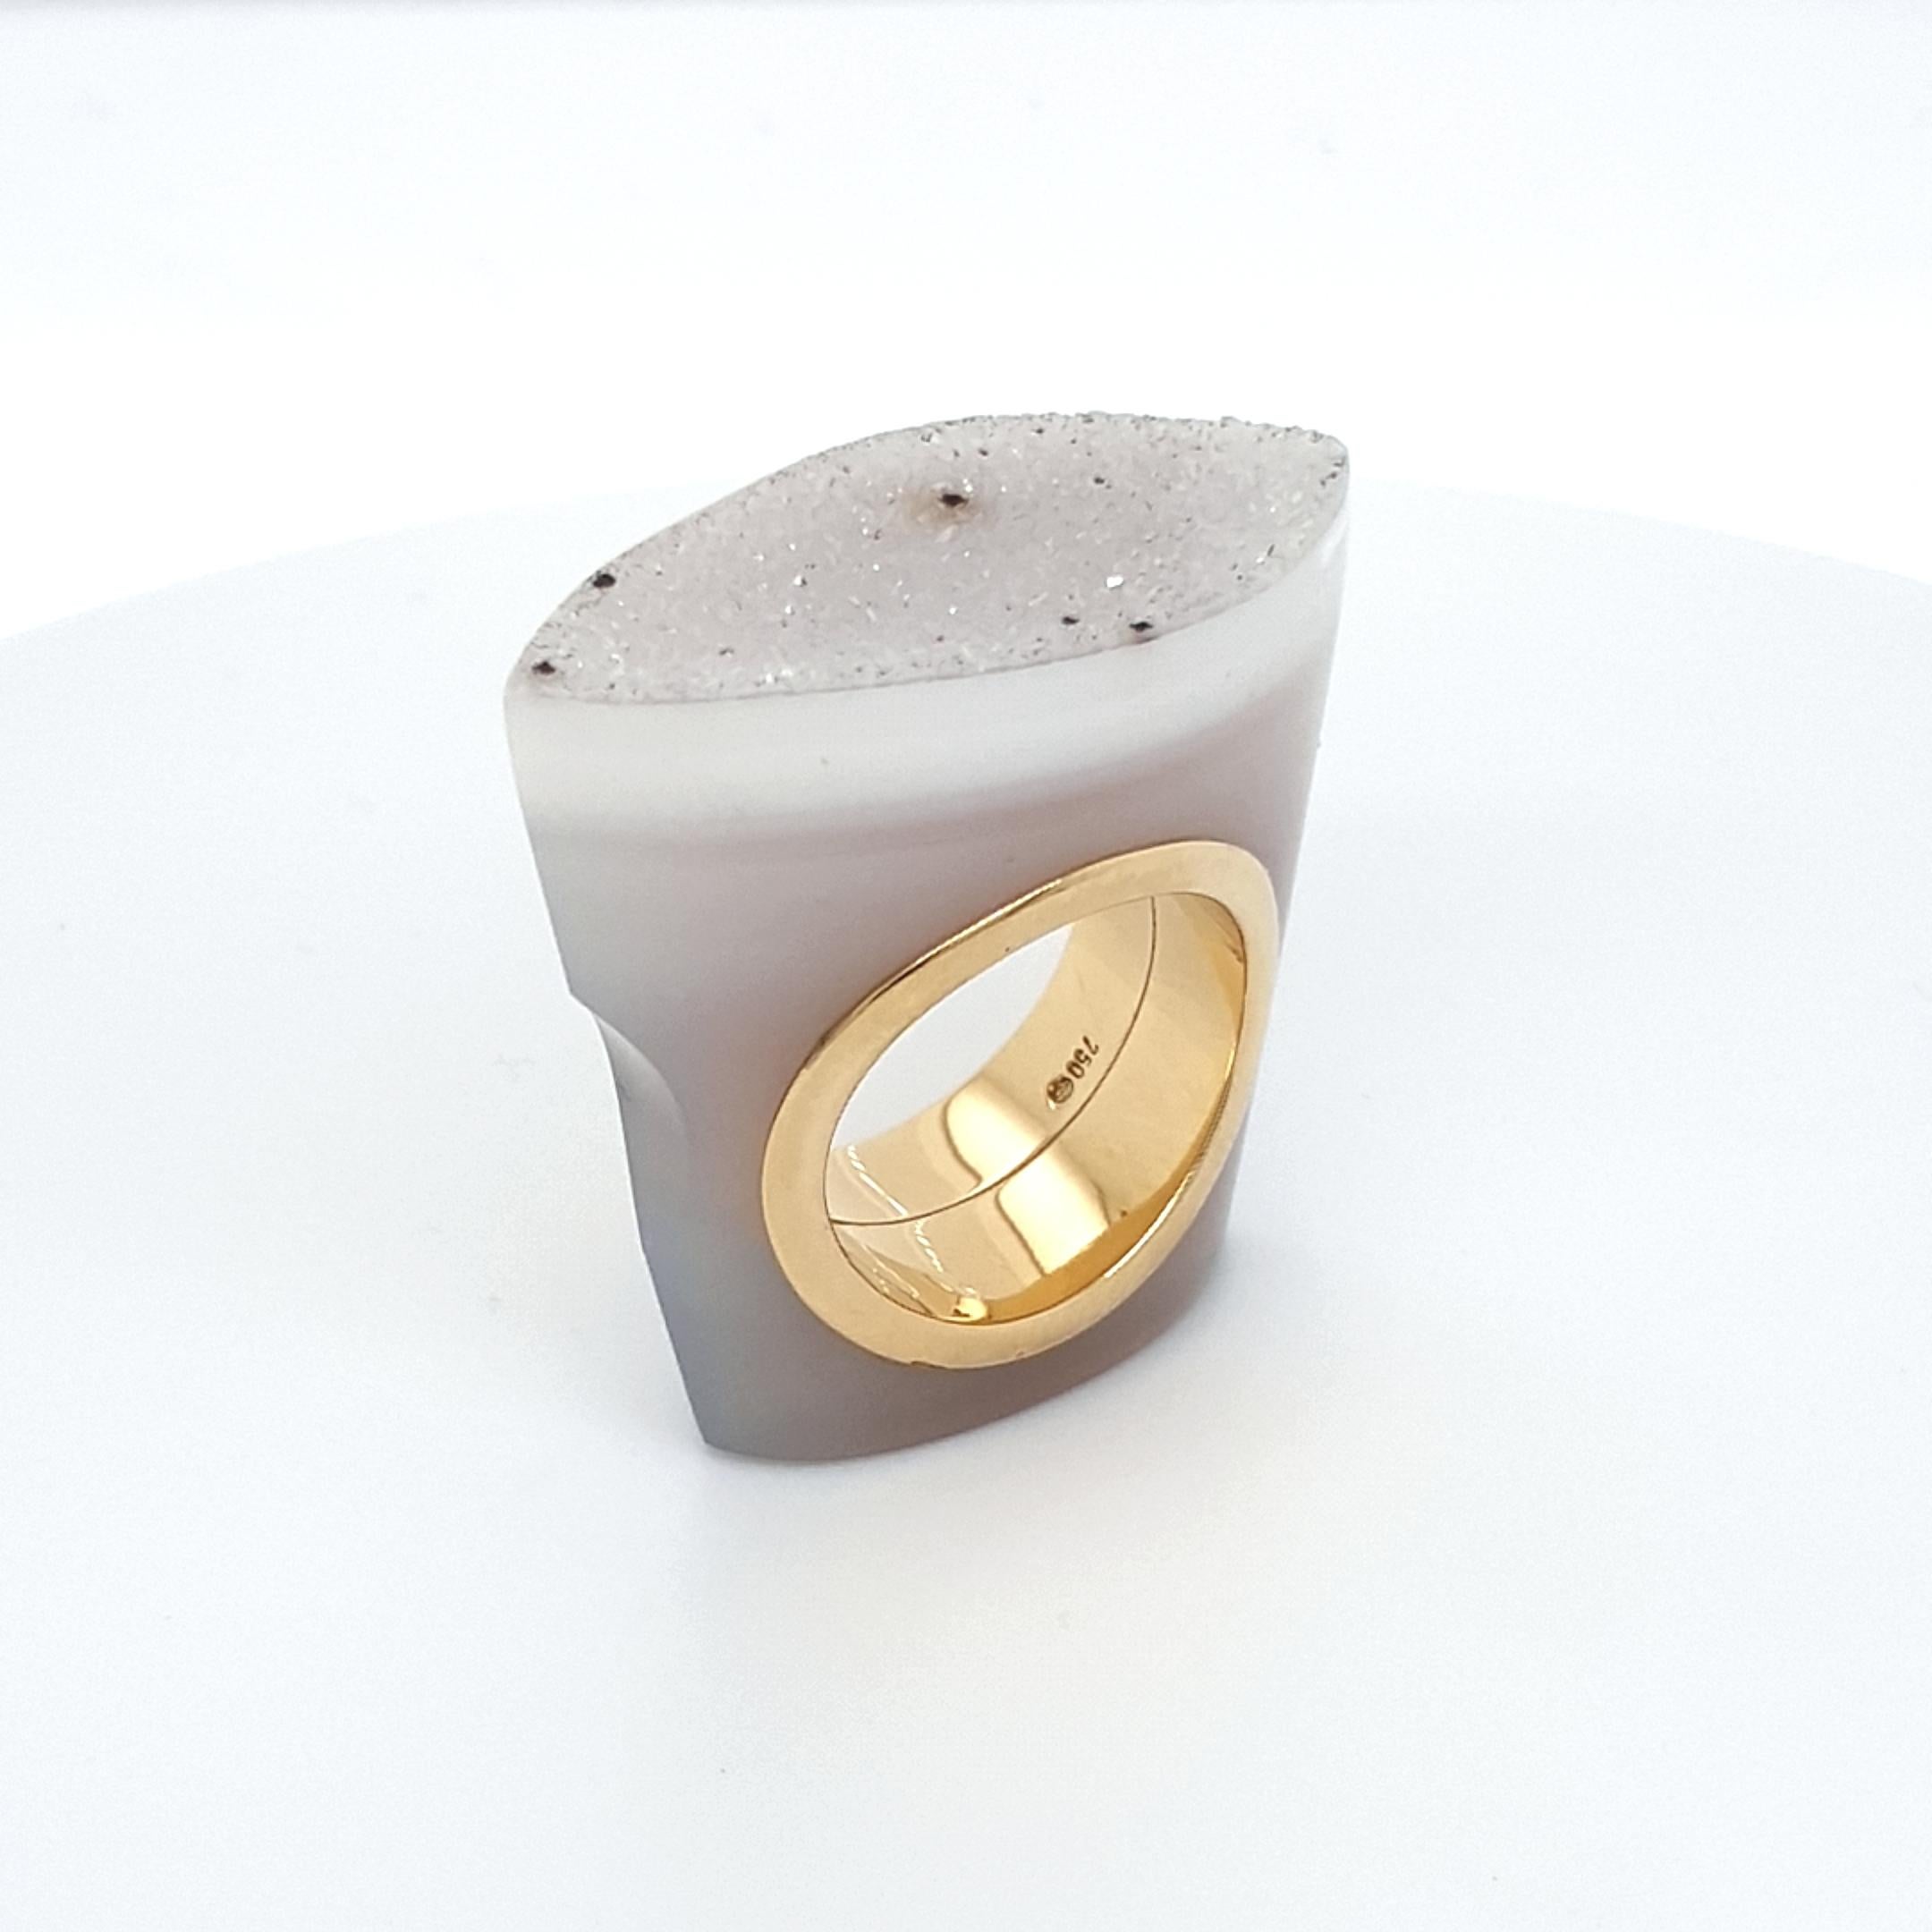 This Crystalized Drusy Agate Ring with 18 Carat Yellow Gold is totally handmade.
Cutting as well as goldwork are made in German quality. 
Finding a suitable nice crystalized Agate to cut a whole ring out of one piece is very difficult.
Unique